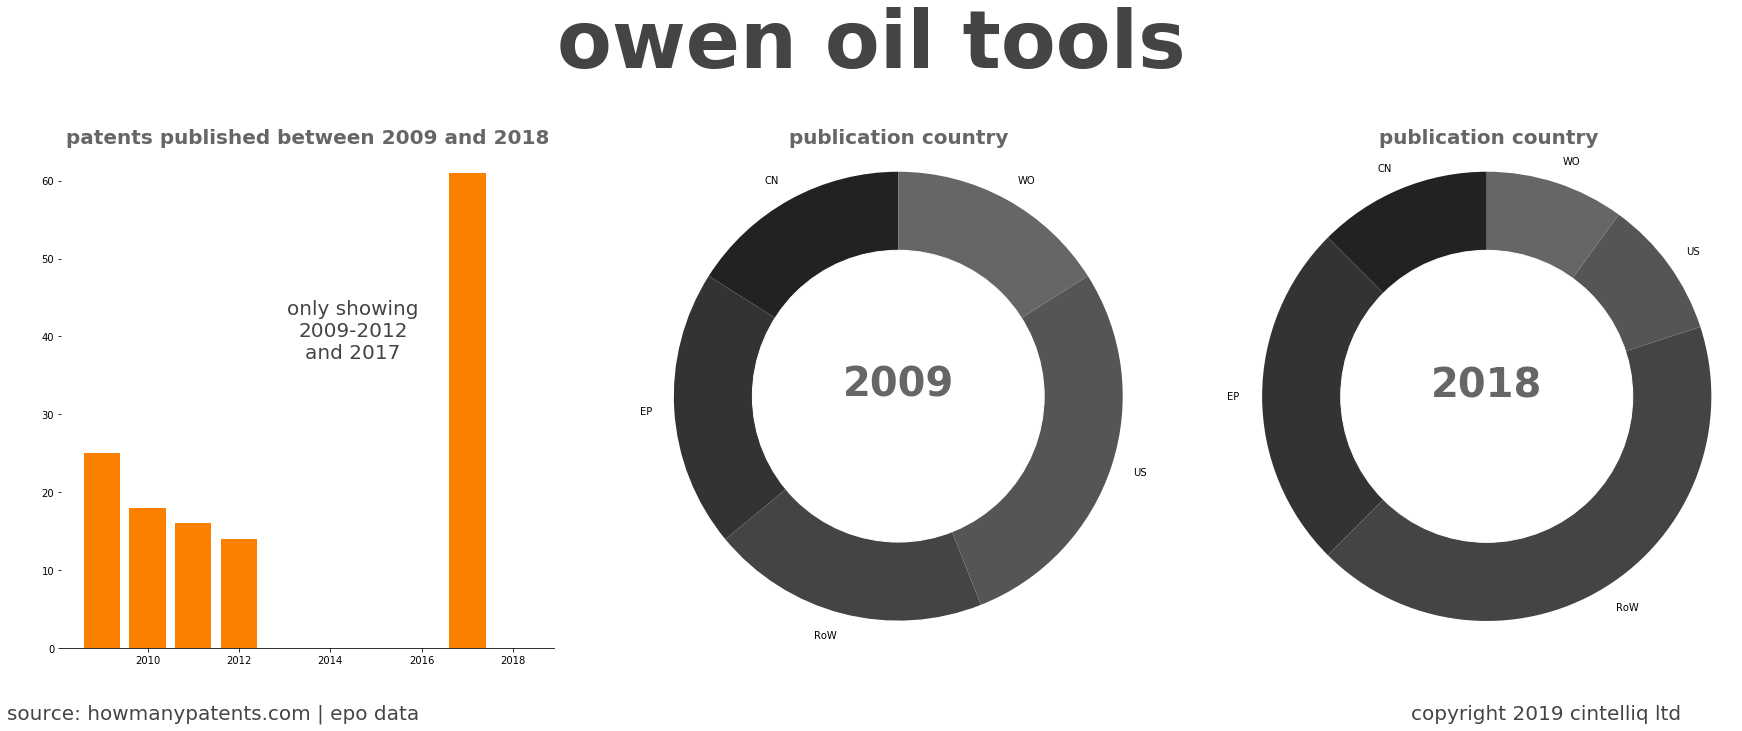 summary of patents for Owen Oil Tools